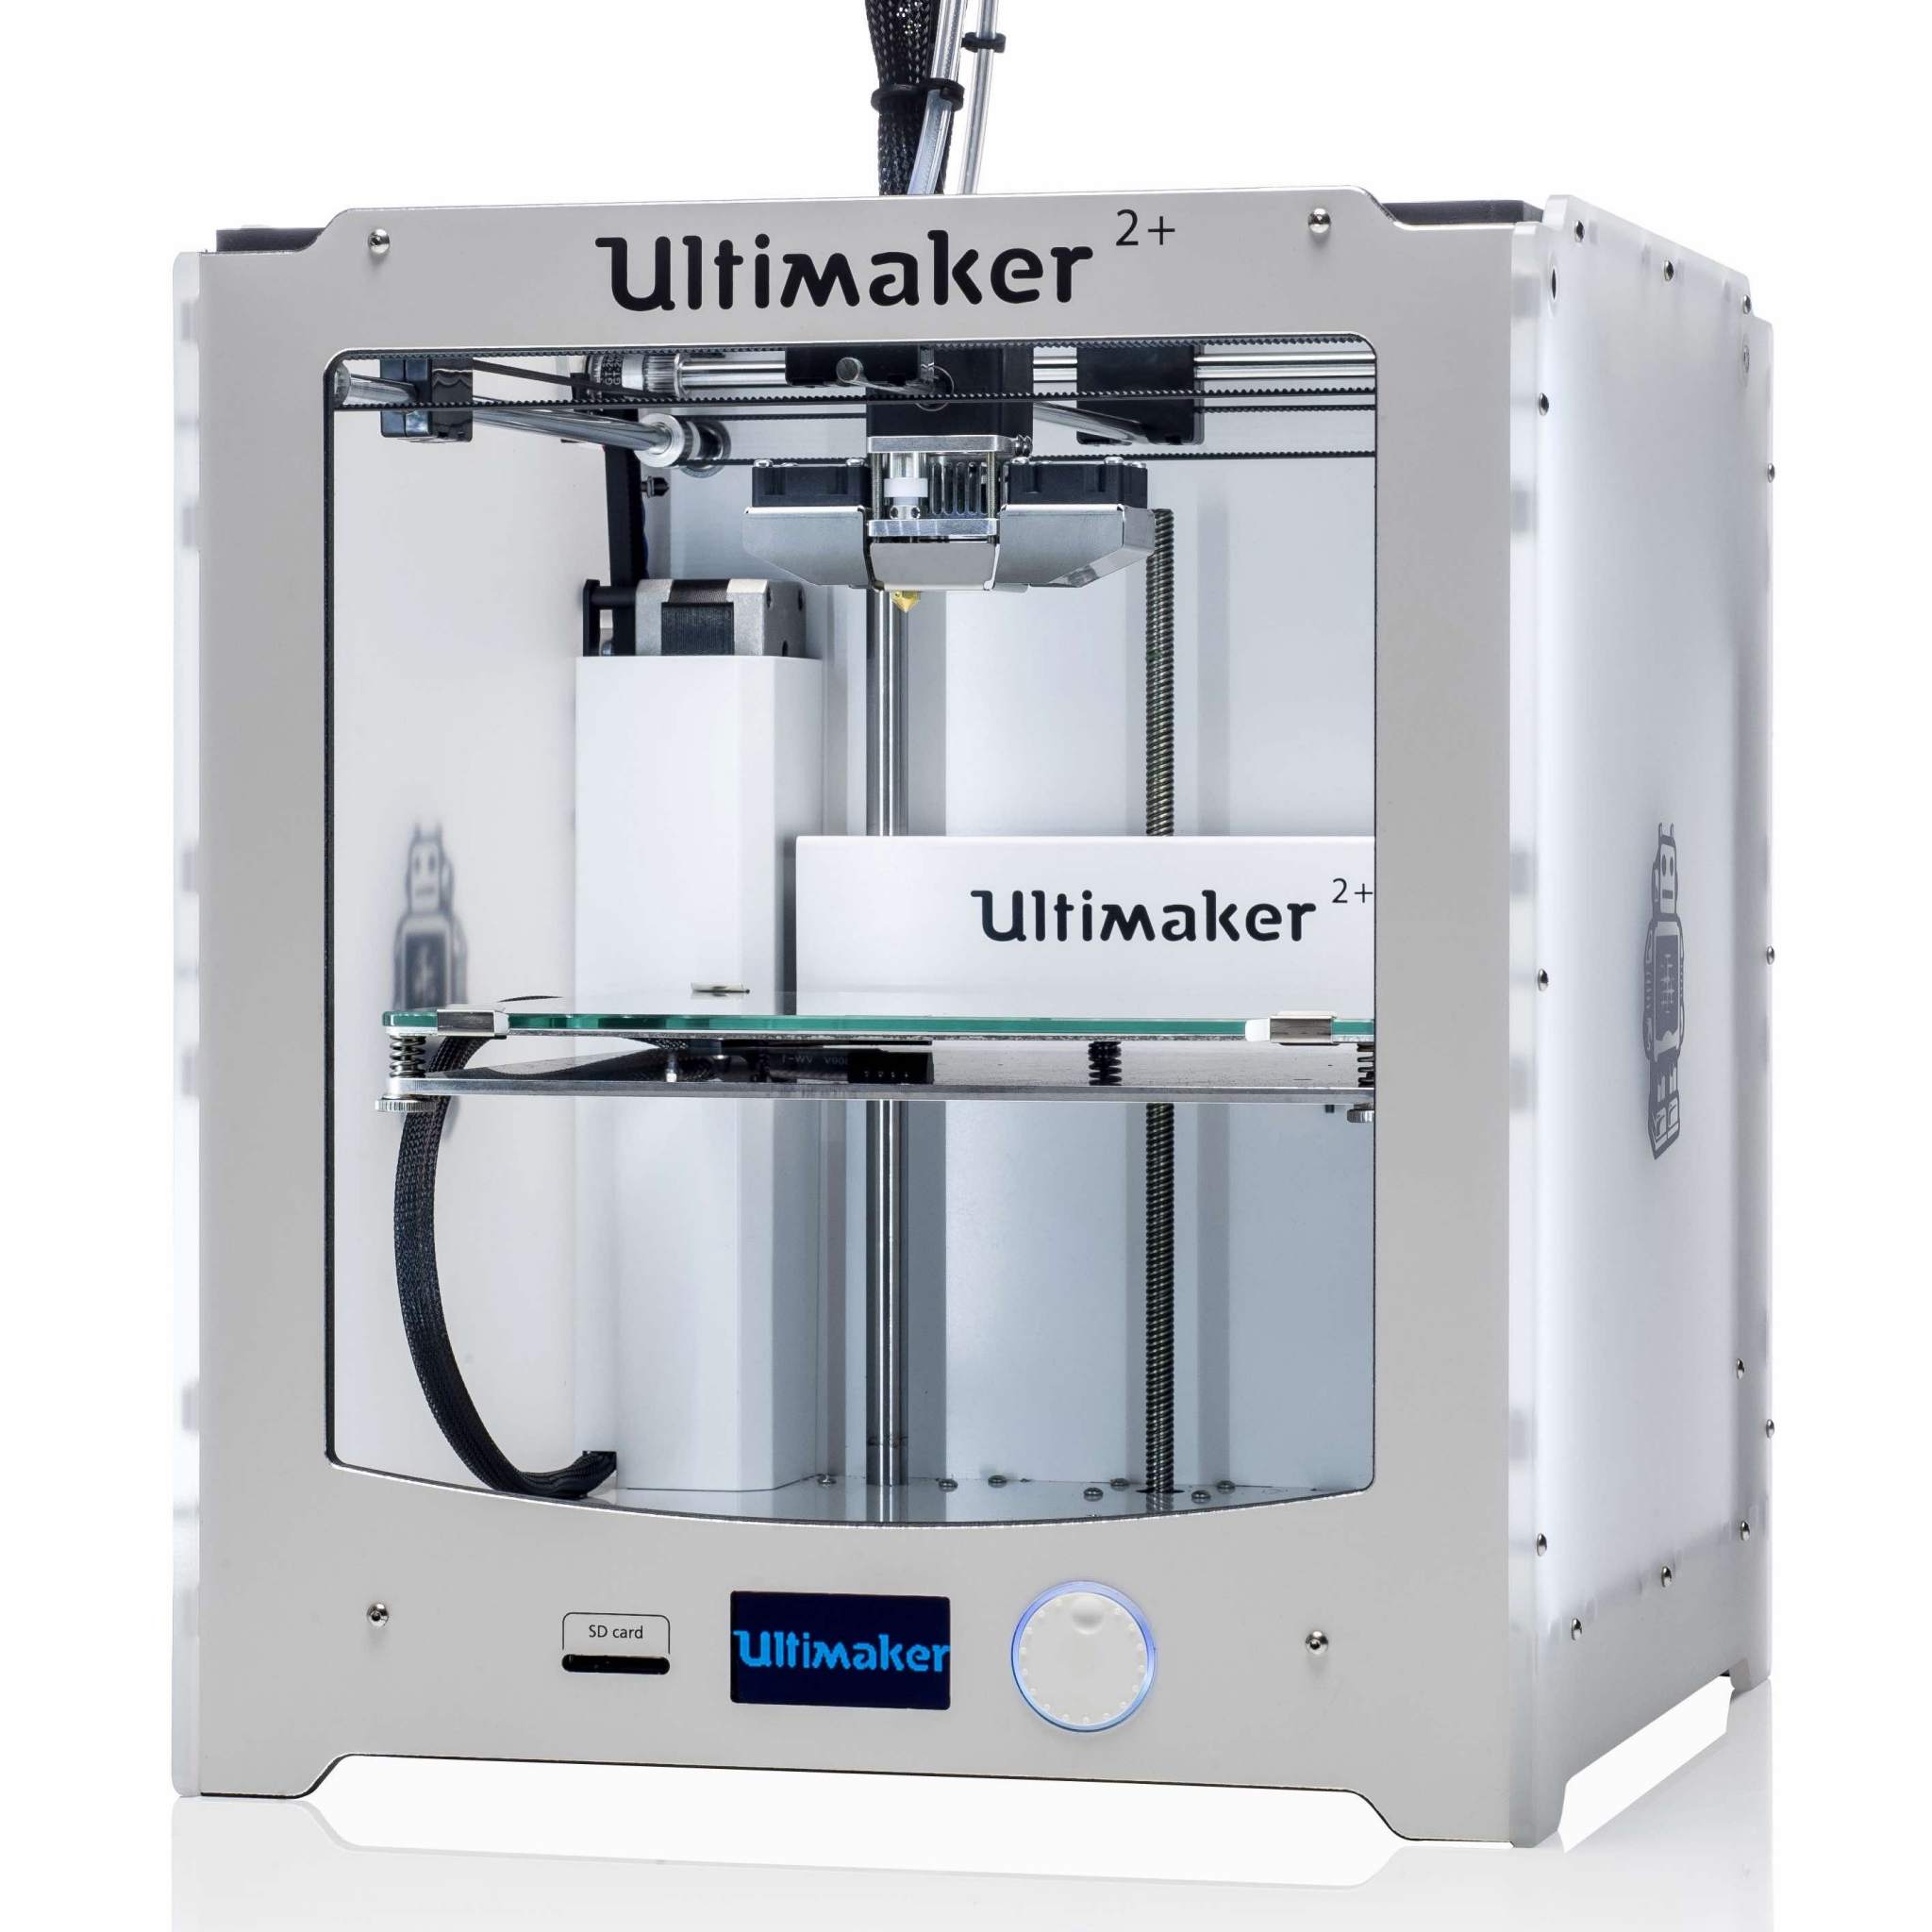 Ultimaker Listens to Its Consumers with Upgraded 3D Printers at CES ... - Ultimaker 06 E1451939327963 1